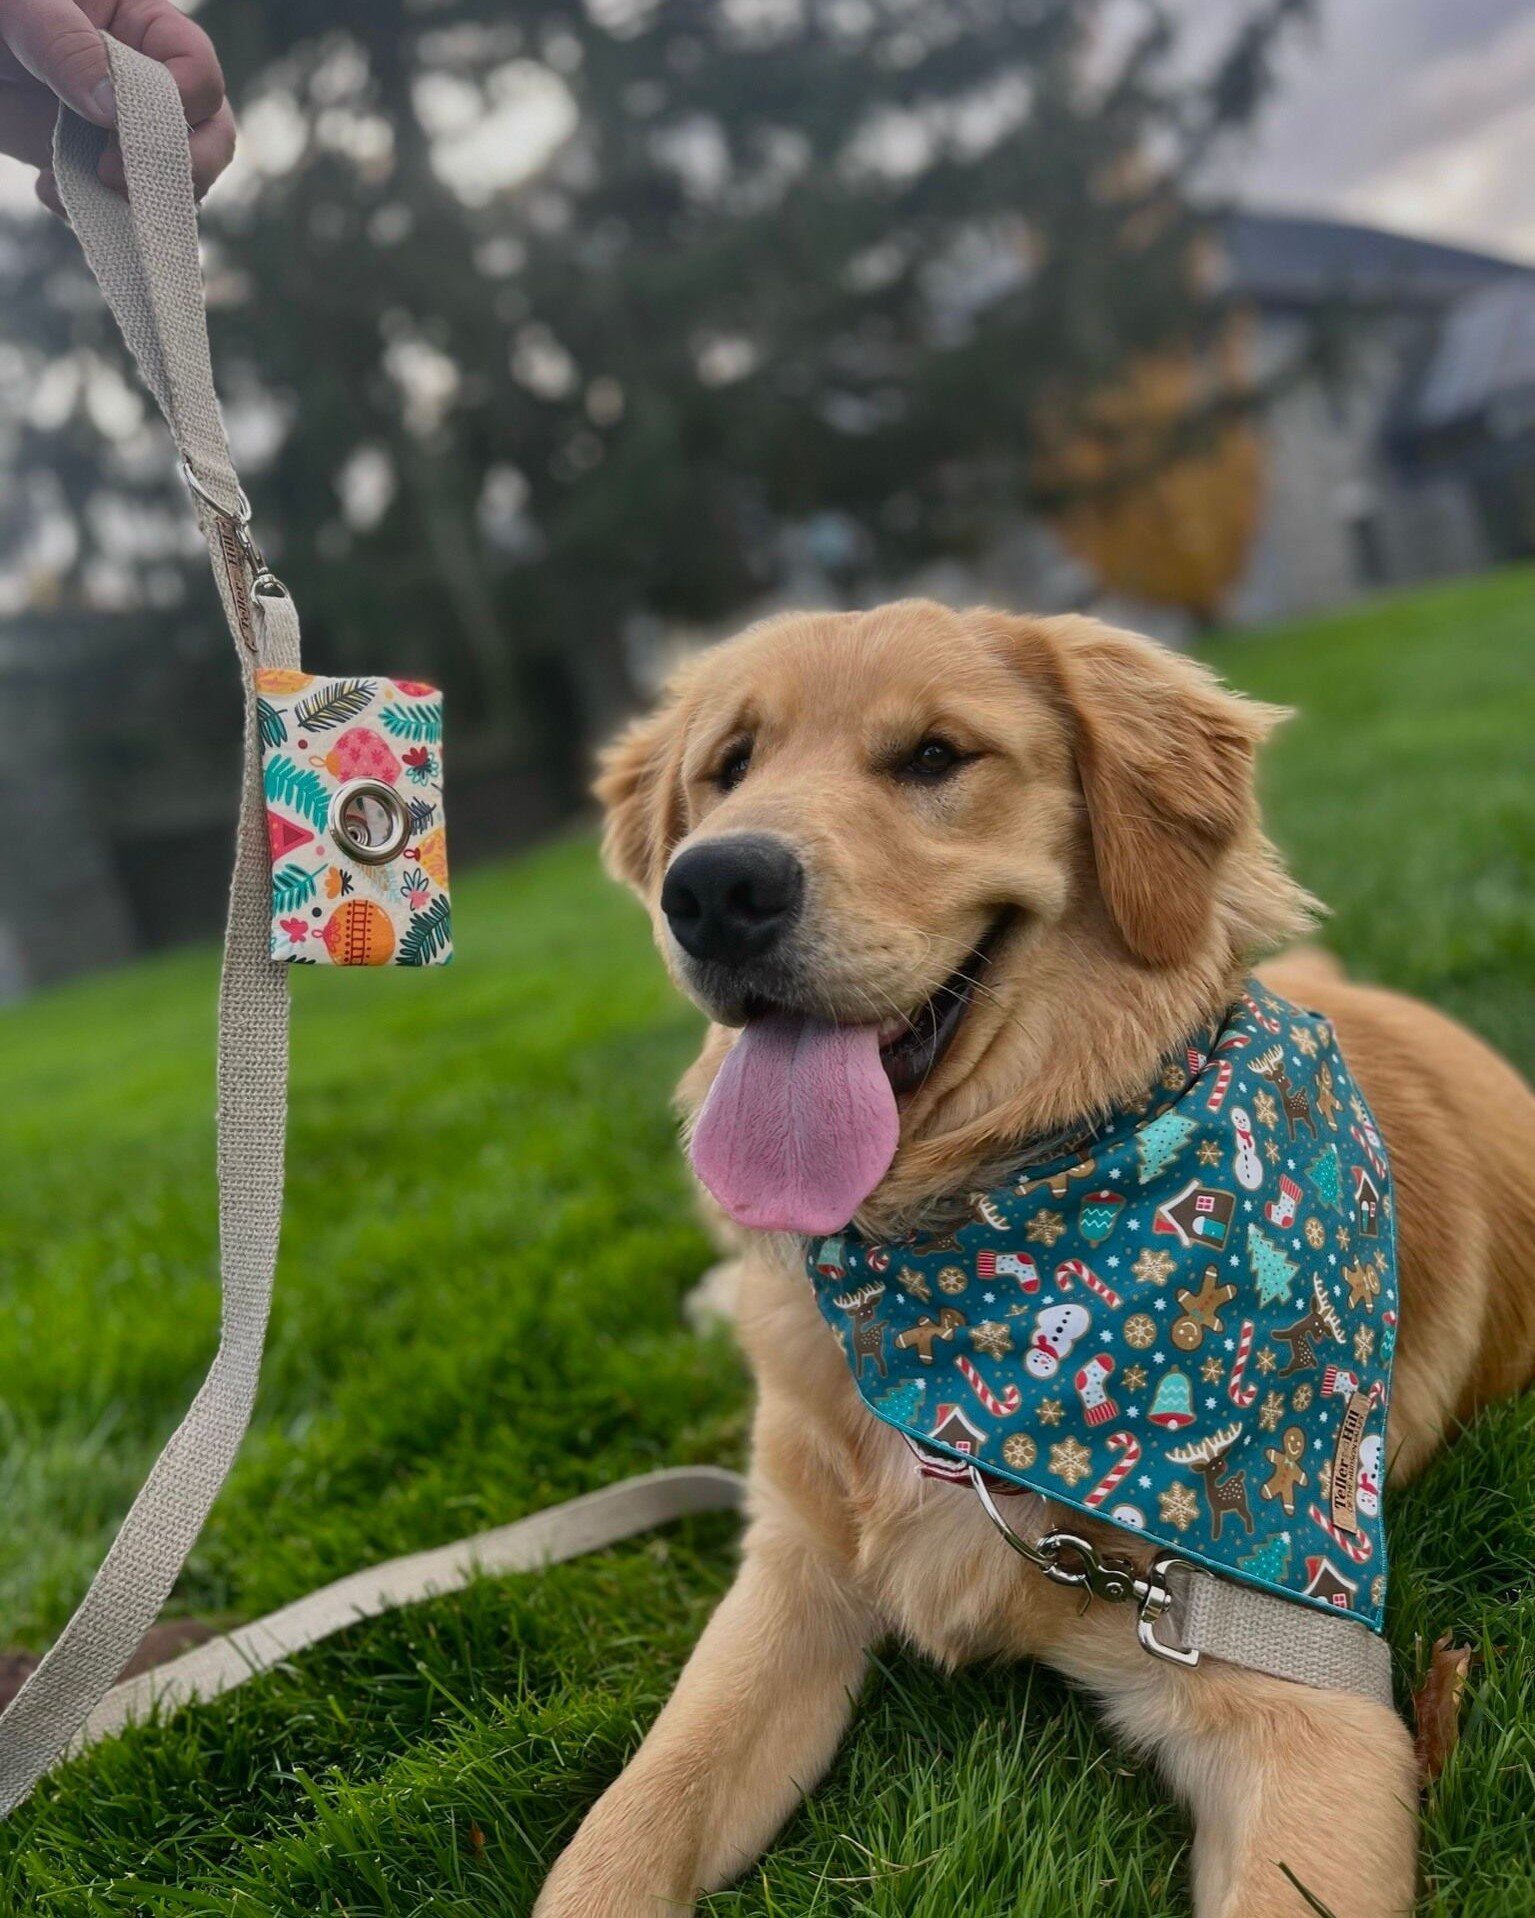 Can everything please be holiday themed? Creme Brulee thinks so! From bandanas to toys to bag holders and more, we&rsquo;ve got your holiday style needs covered! 

The last day to order items in time for the holidays with standard shipping is Decembe